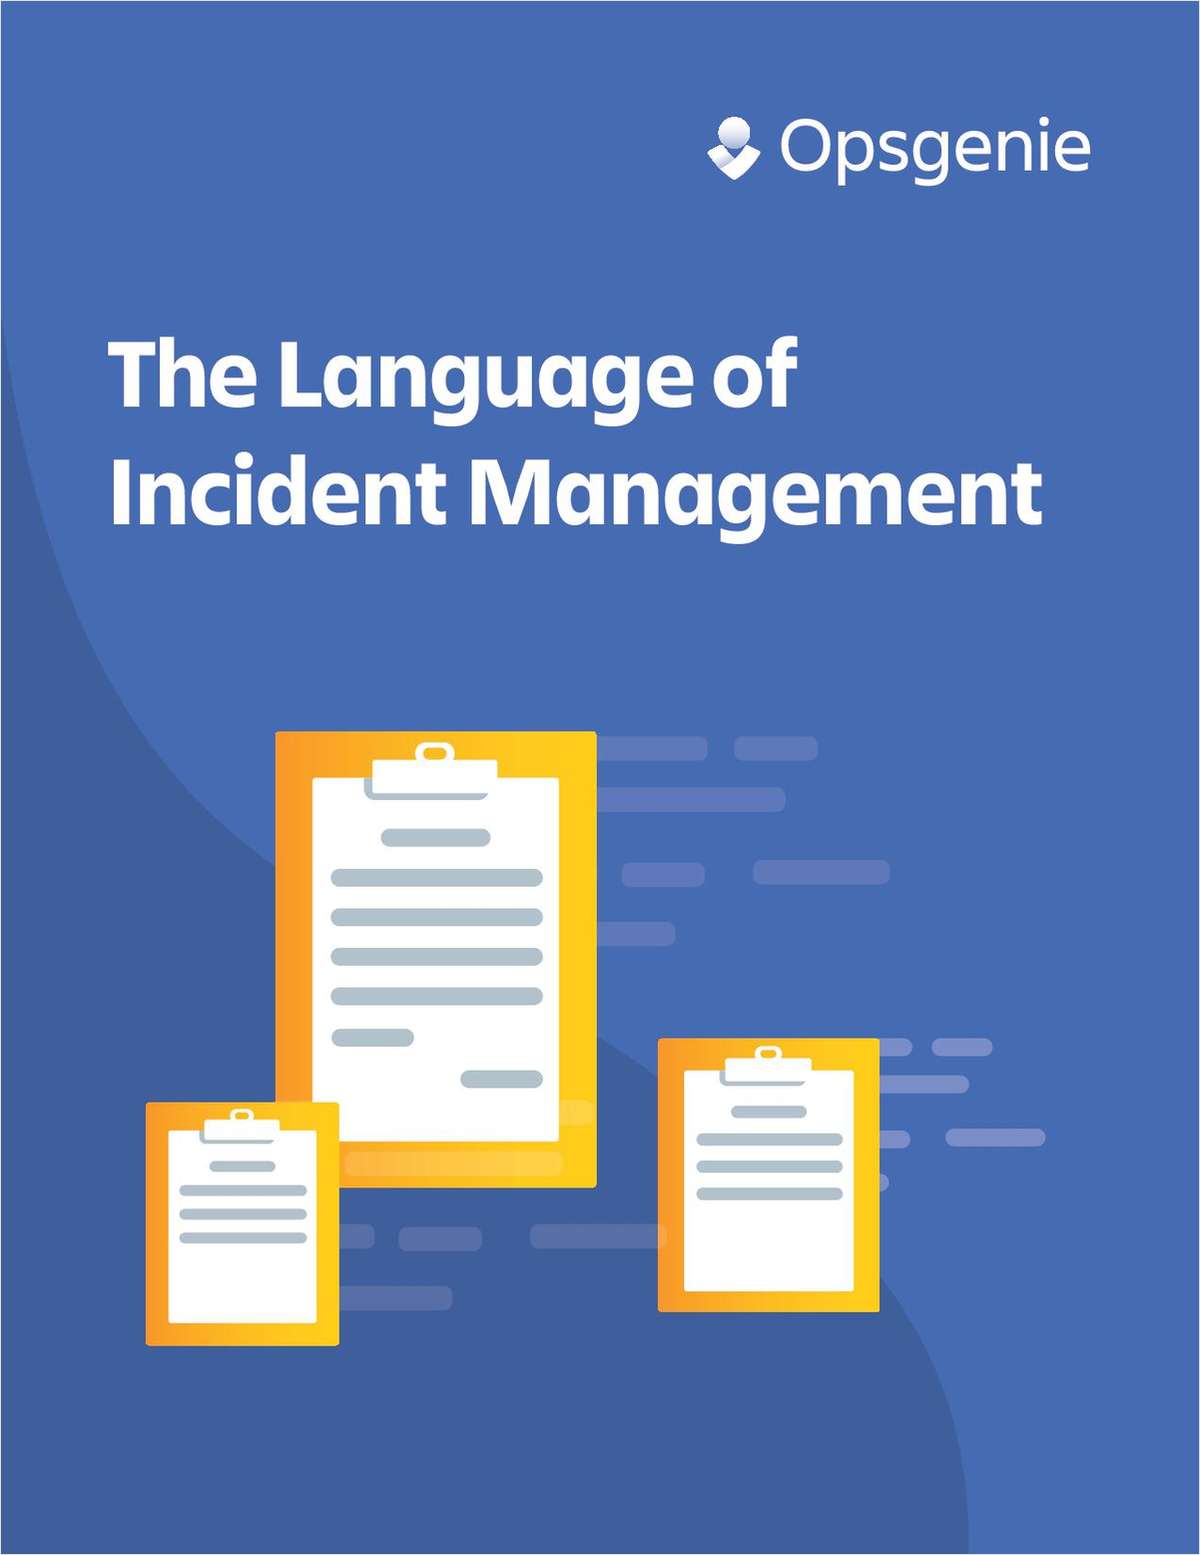 The Language of Incident Management